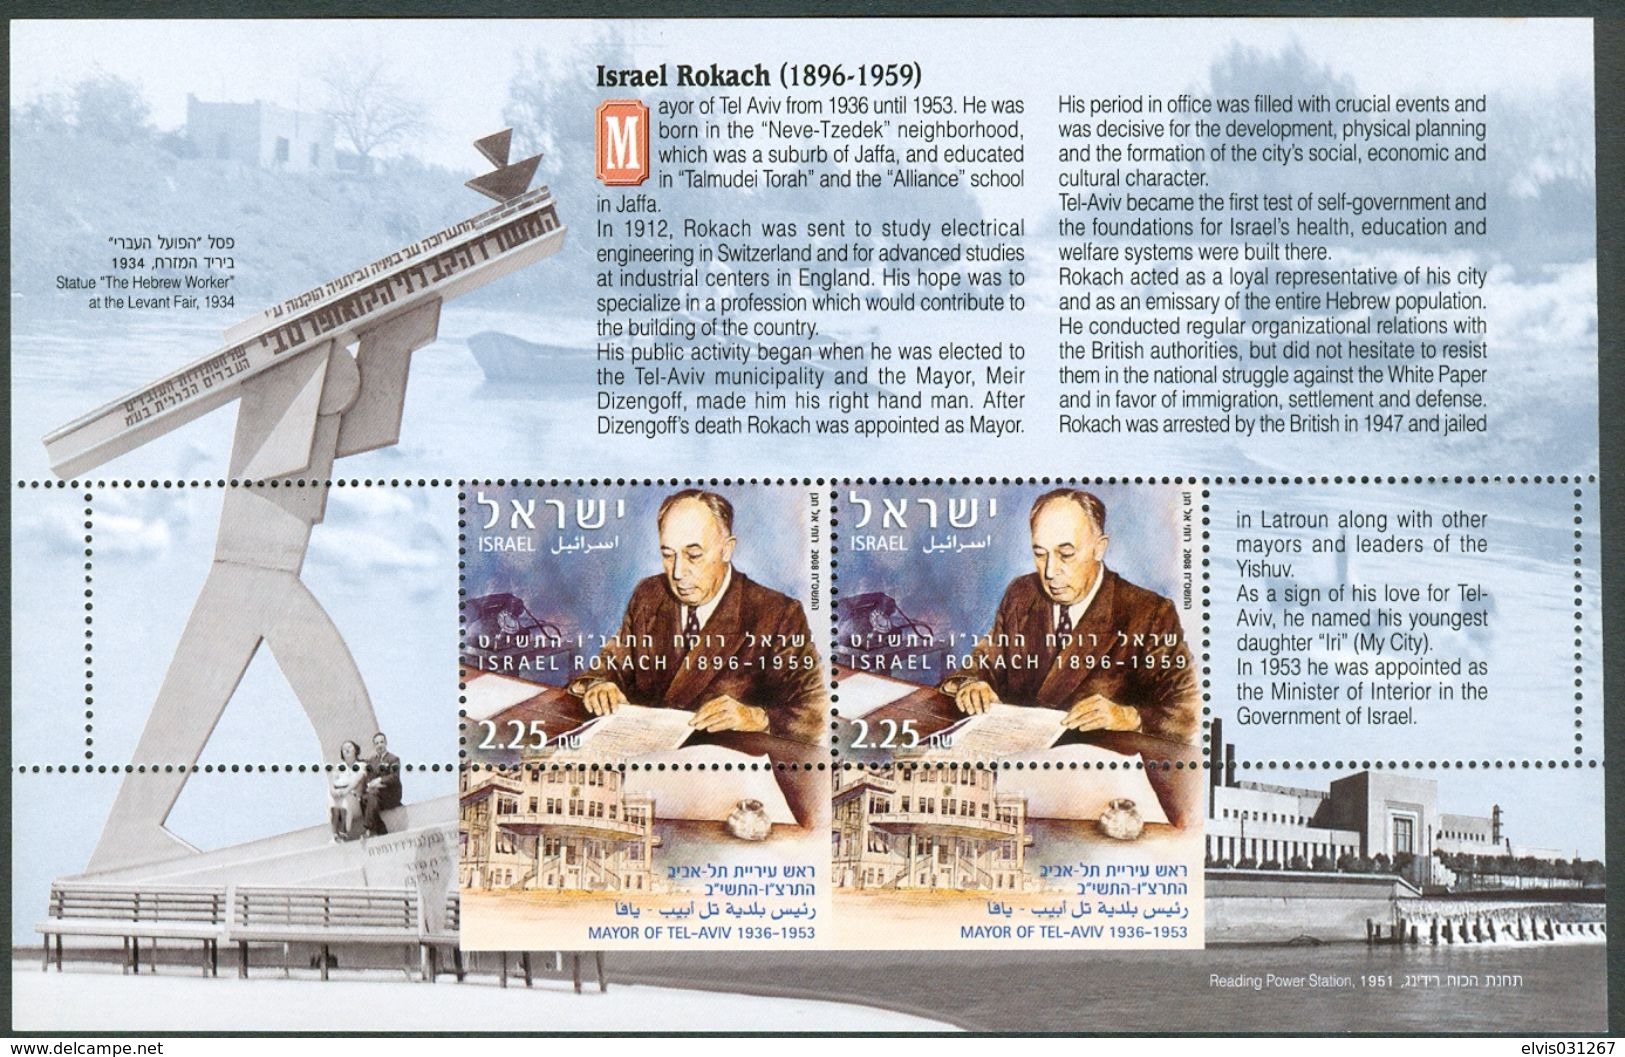 Israel BOOKLET SHEETLETS - 2008, MS from prestige booklet - Tel Aviv Centennial - NMH - Mint Condition -